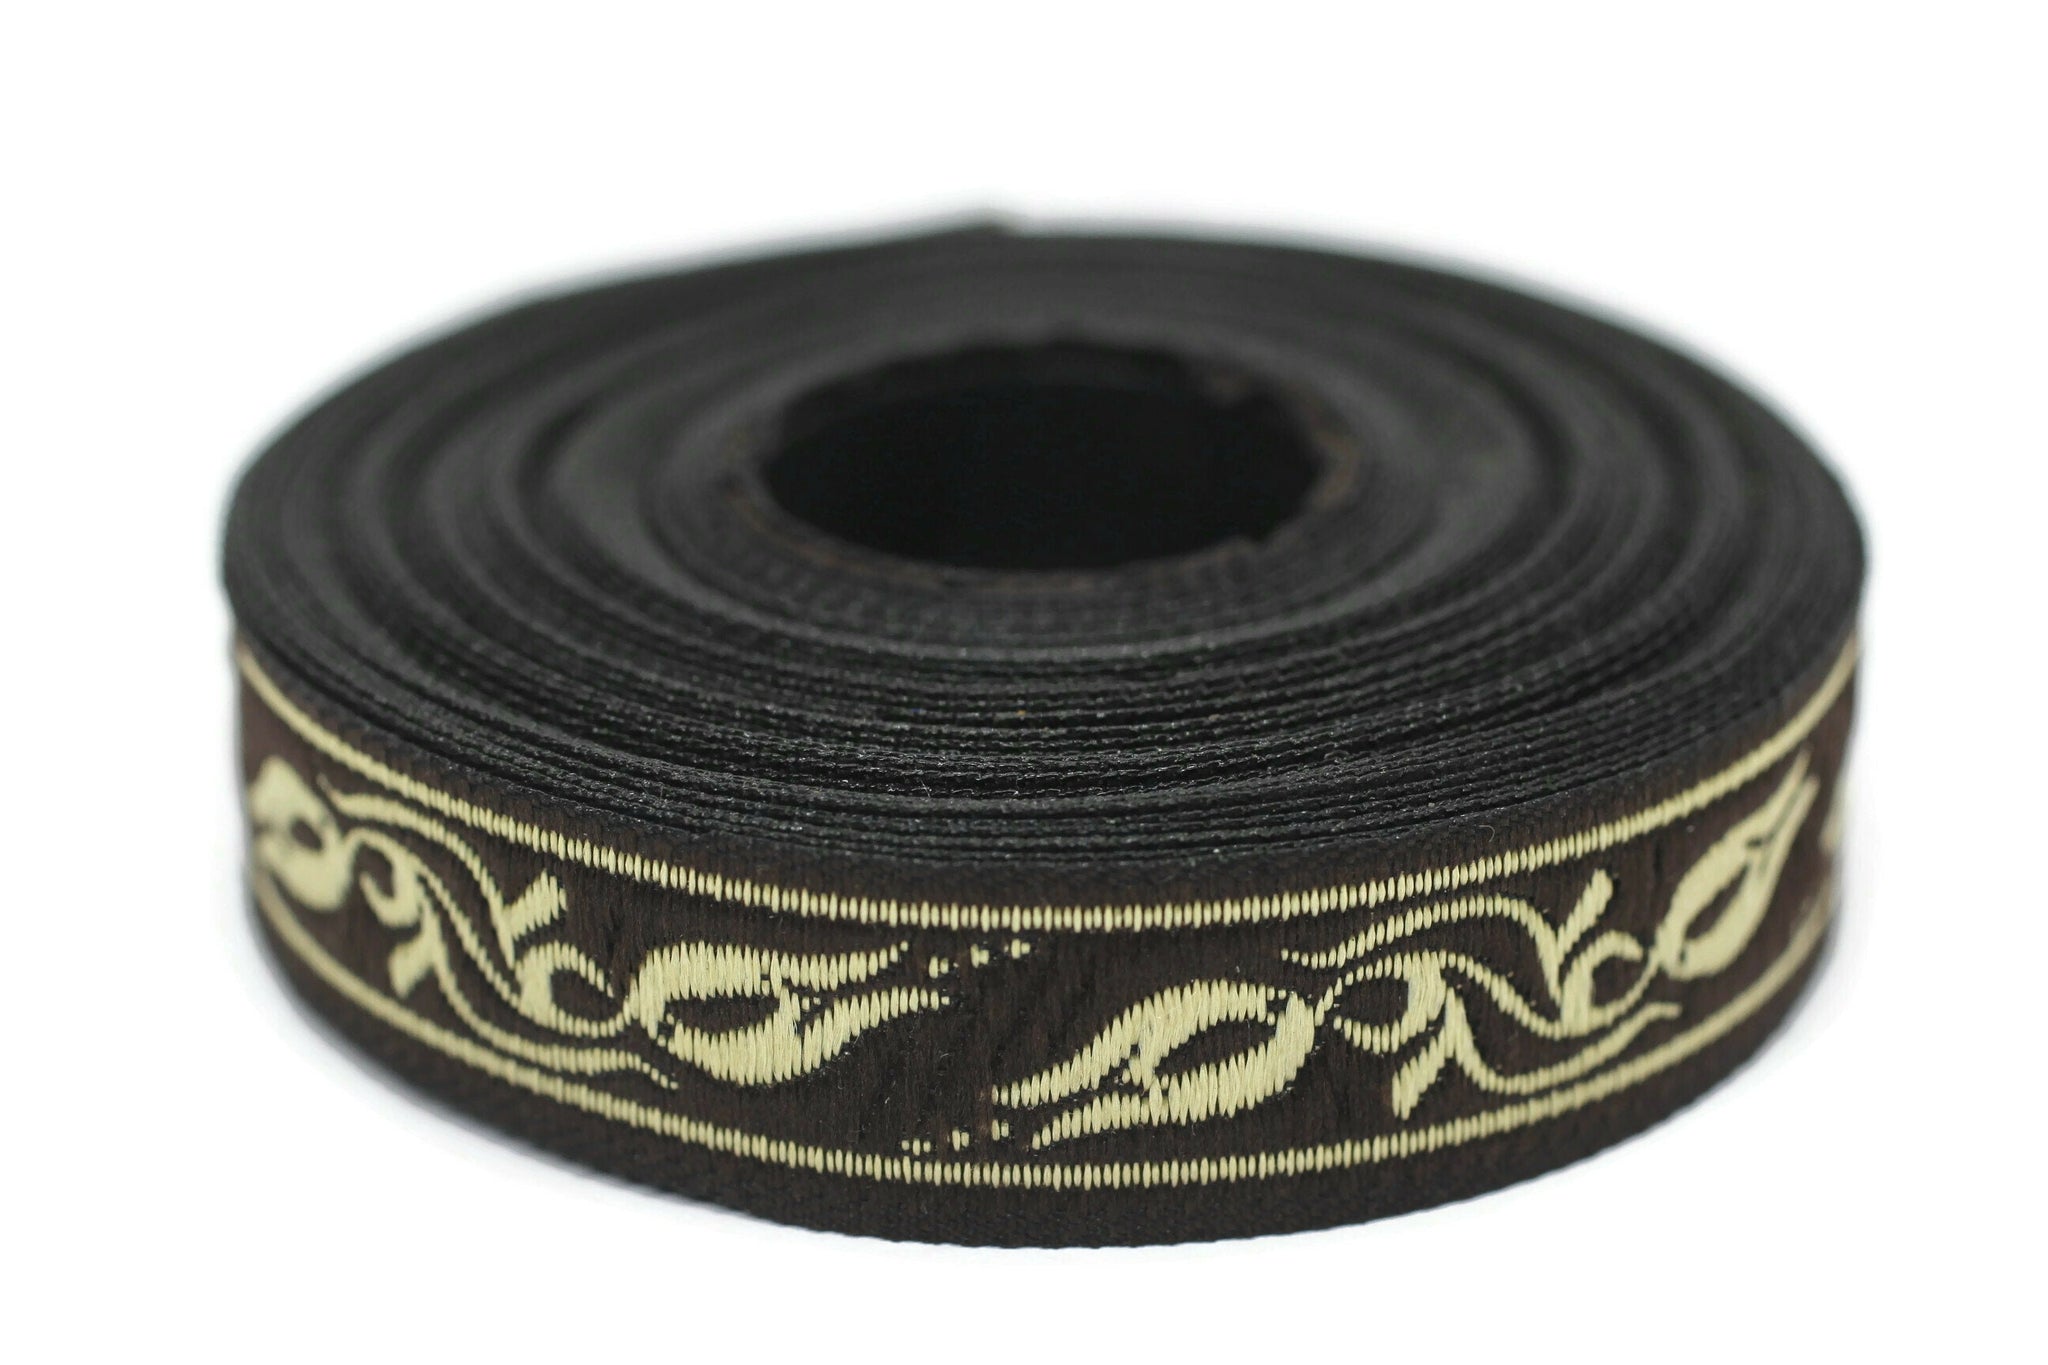 16 mm Brown Tulips embroidered jacquard Ribbons (0.62 inches), Jacquard trim, craft supplies, collar supply, sewing trim, 16072